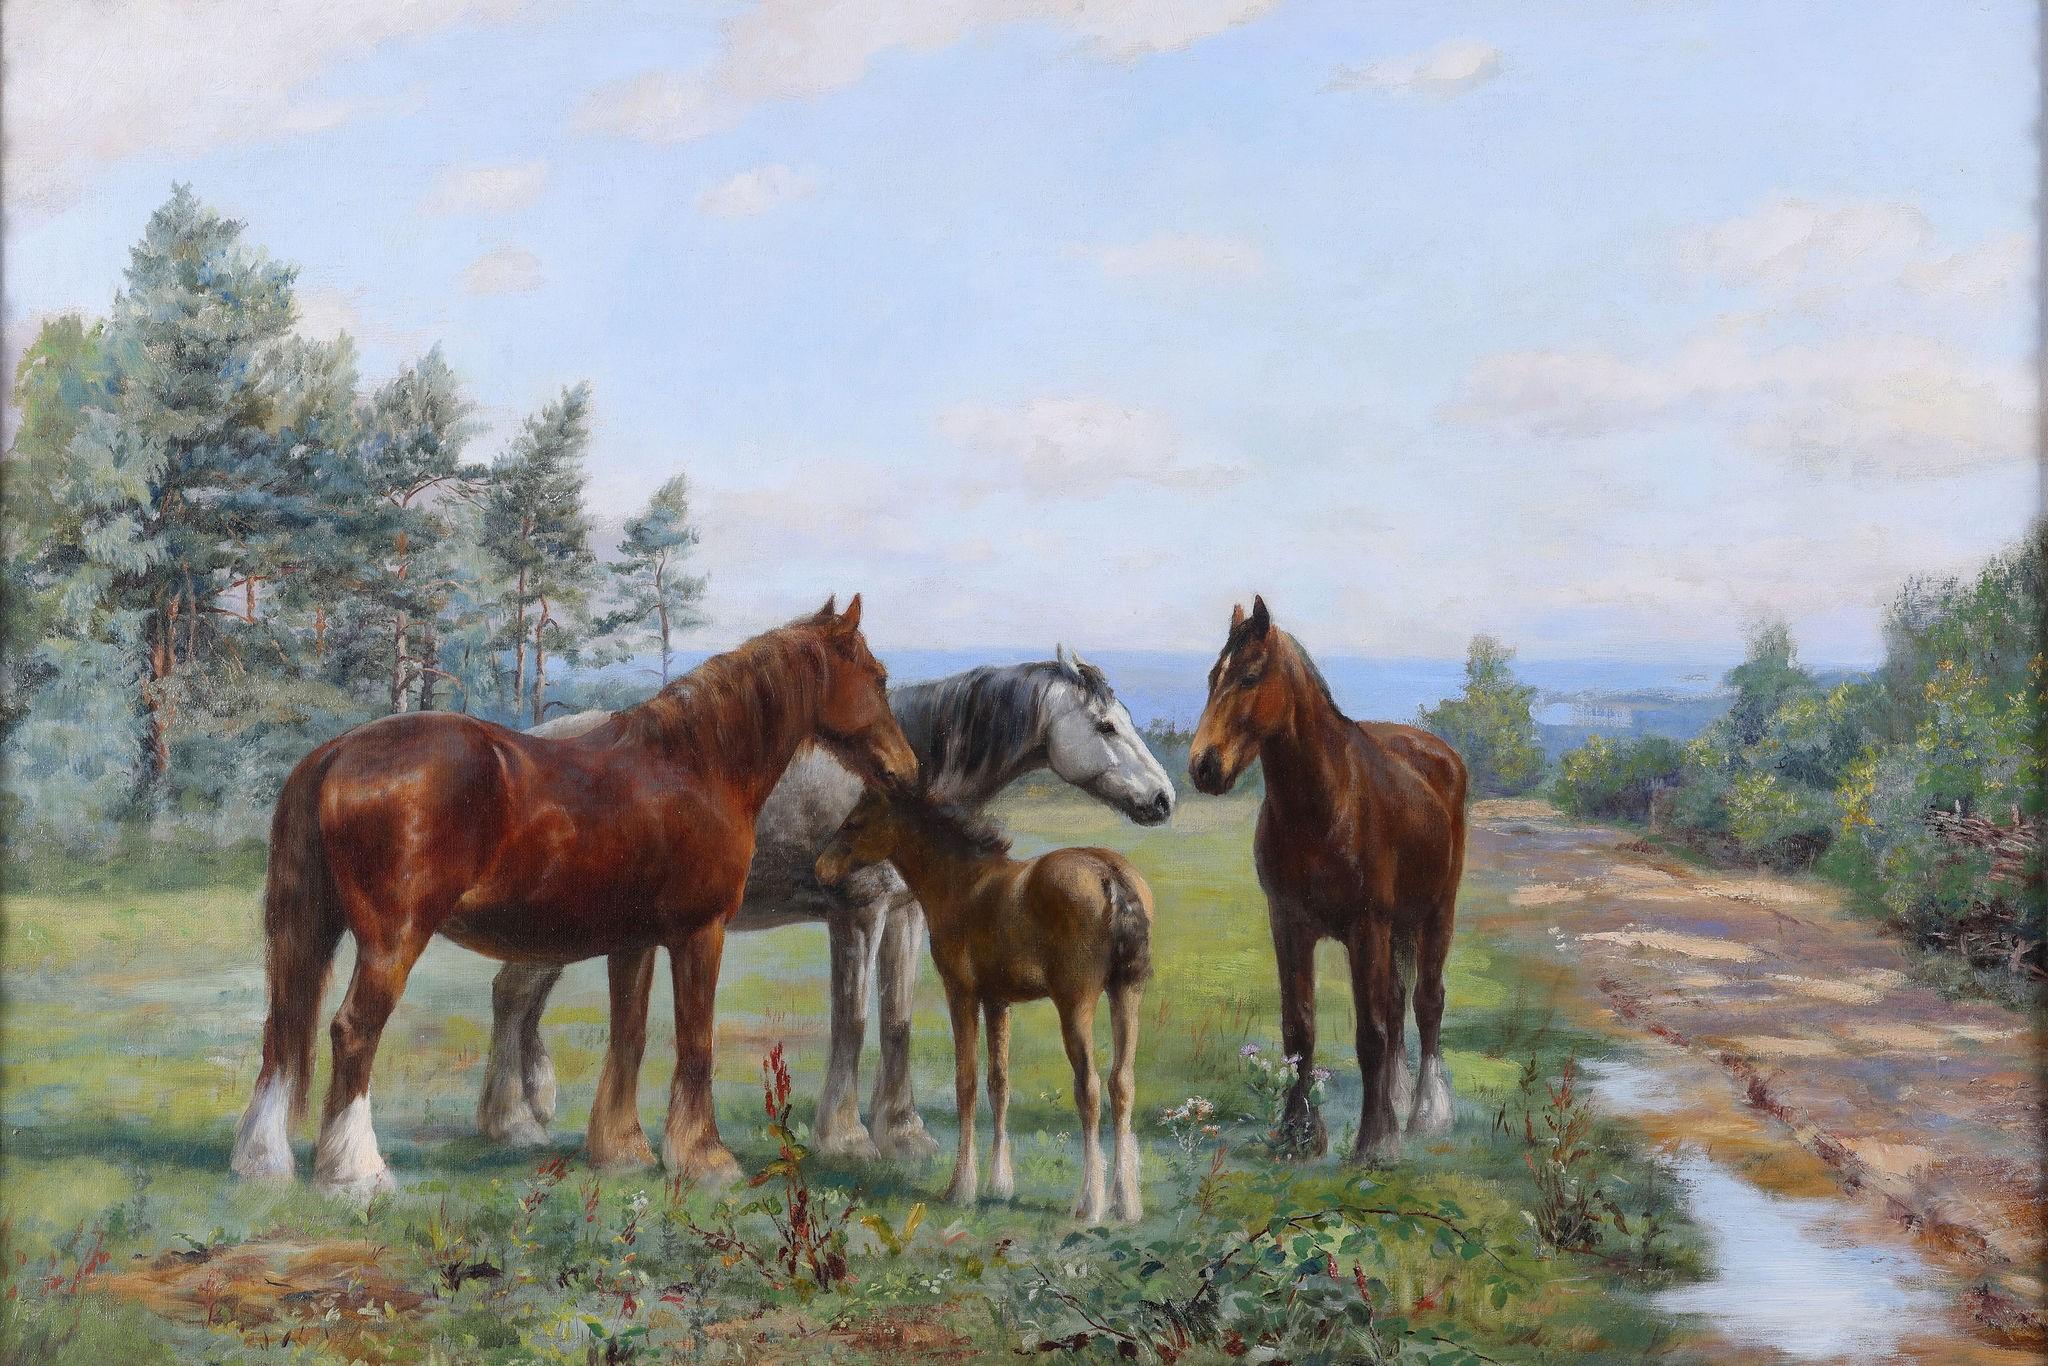 Three horses and a Foal - Painting by Wright Barker